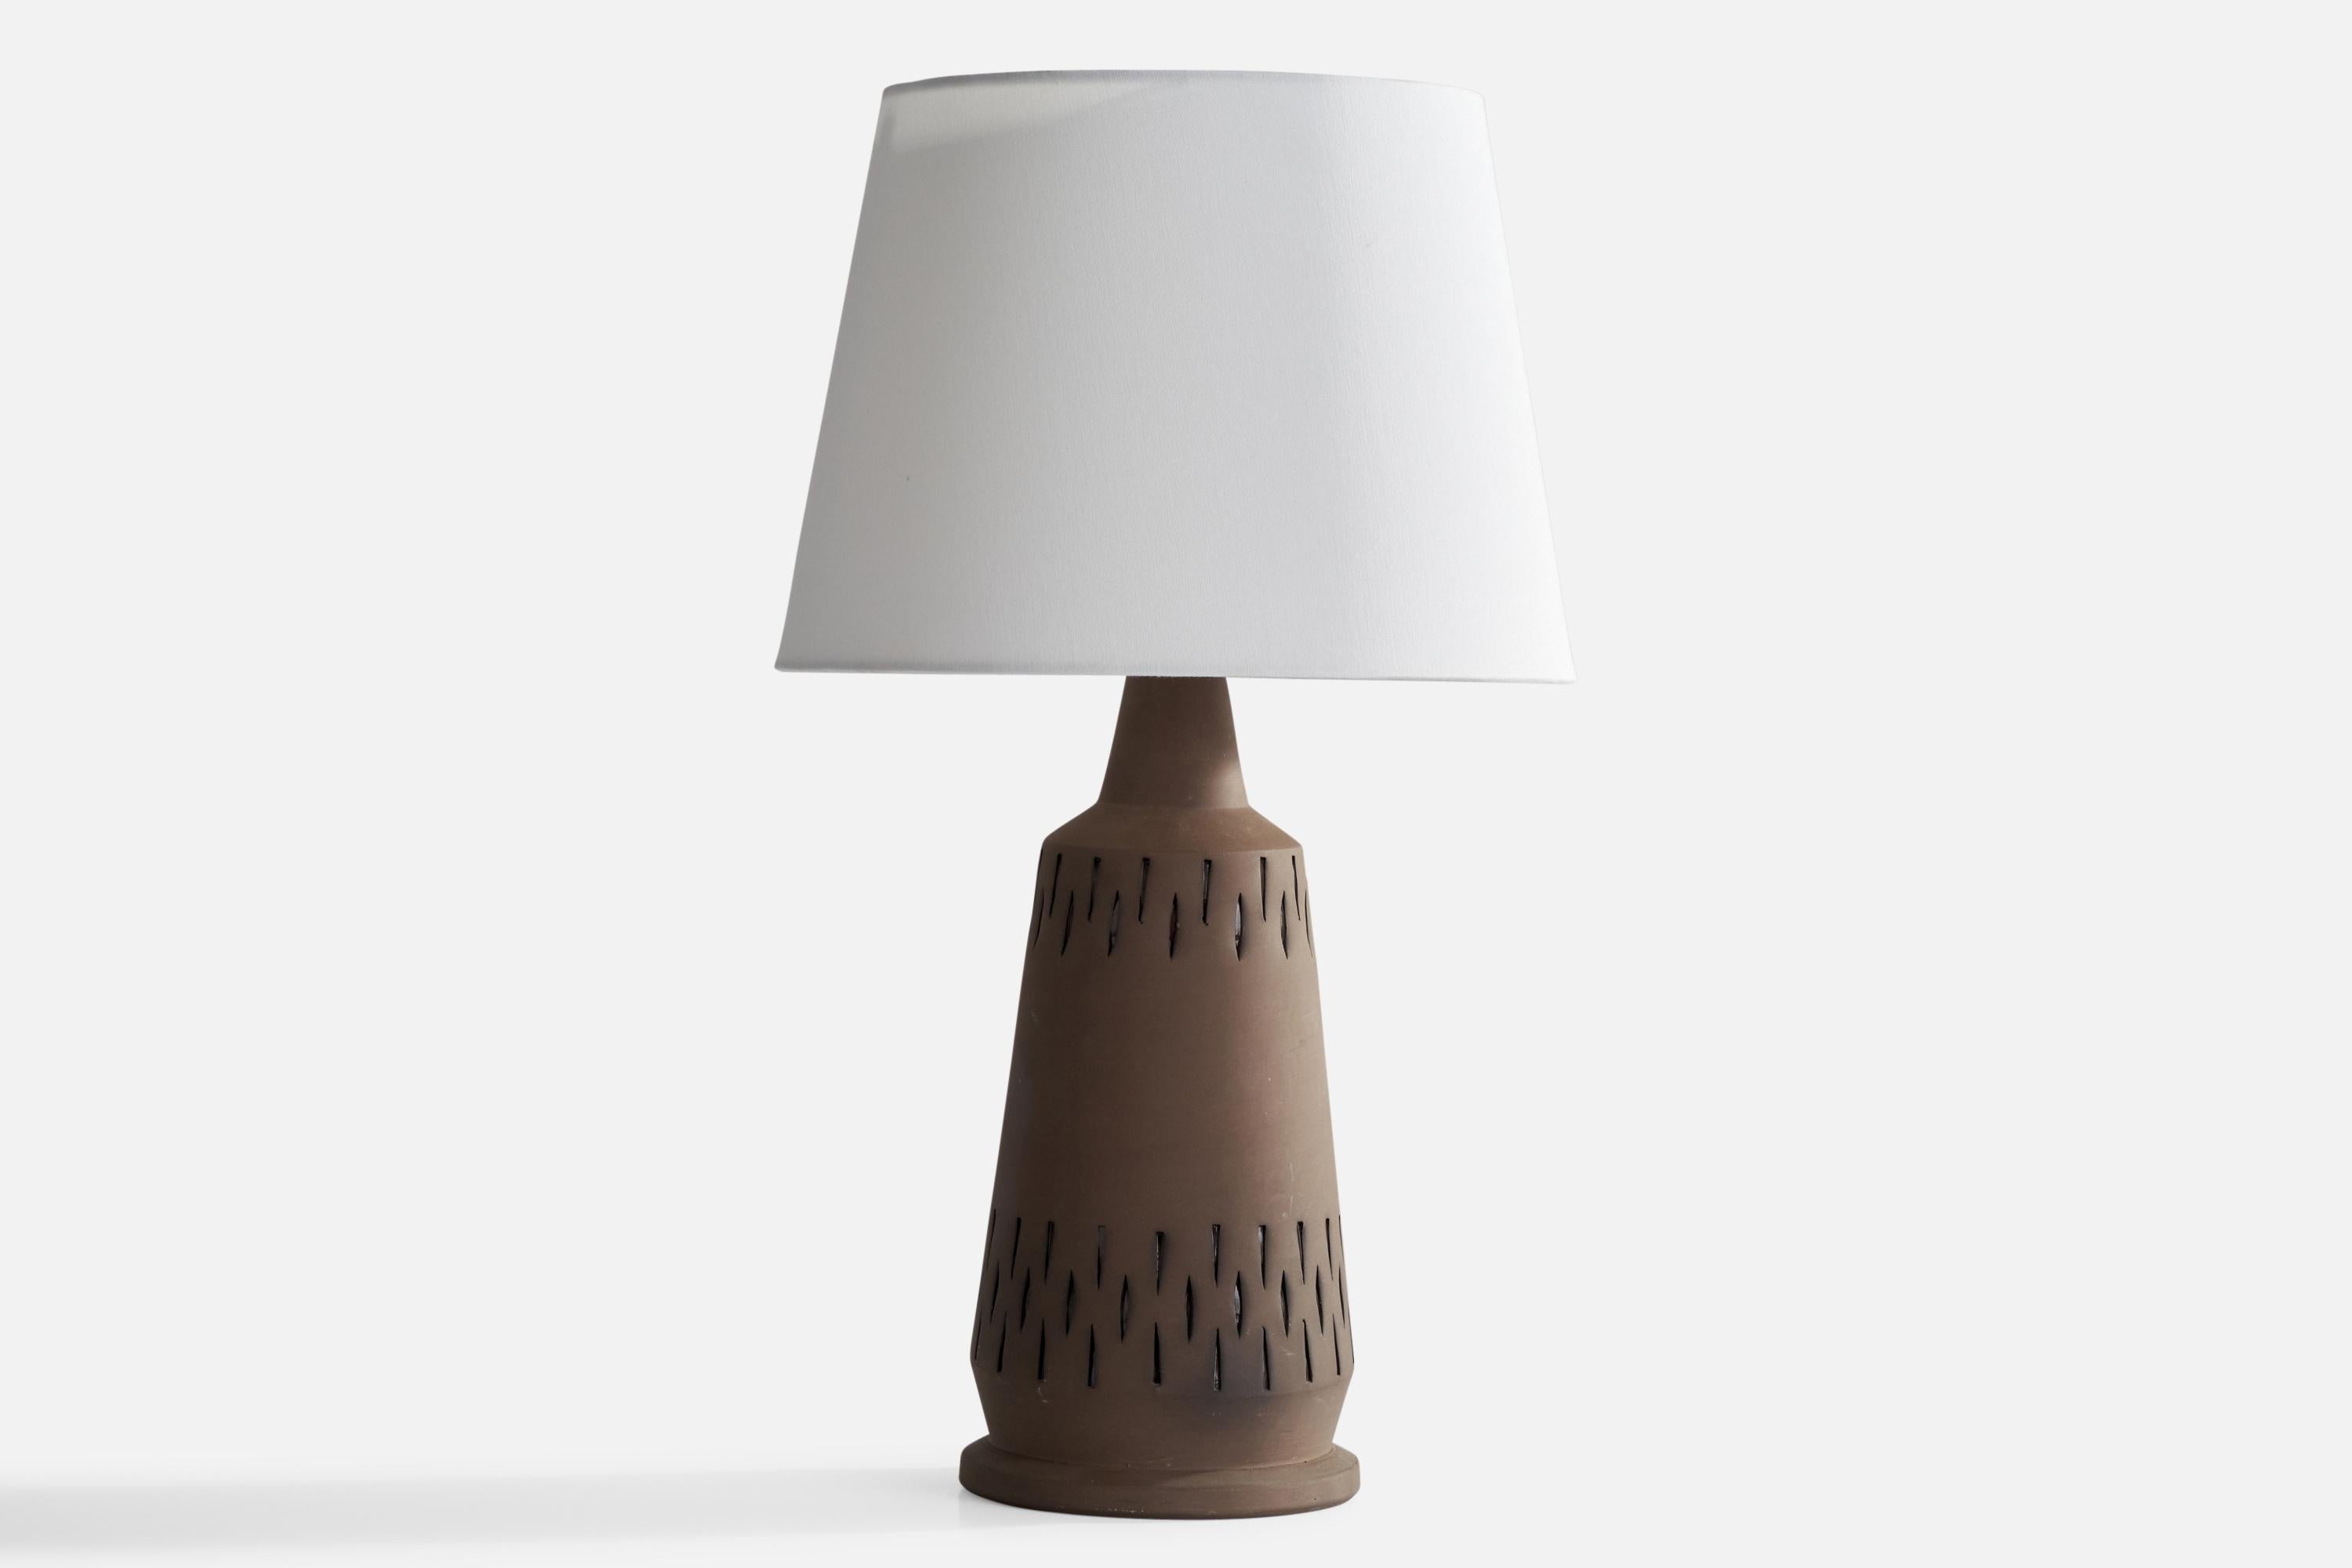 An unglazed brown ceramic table lamp designed and produced by Nila Keramik, Sweden, 1970s.

Dimensions of Lamp (inches): 16” H x 6.1”  Diameter
Dimensions of Shade (inches): 9”  Top Diameter x 12” Bottom Diameter x 8.75” H
Dimensions of Lamp with